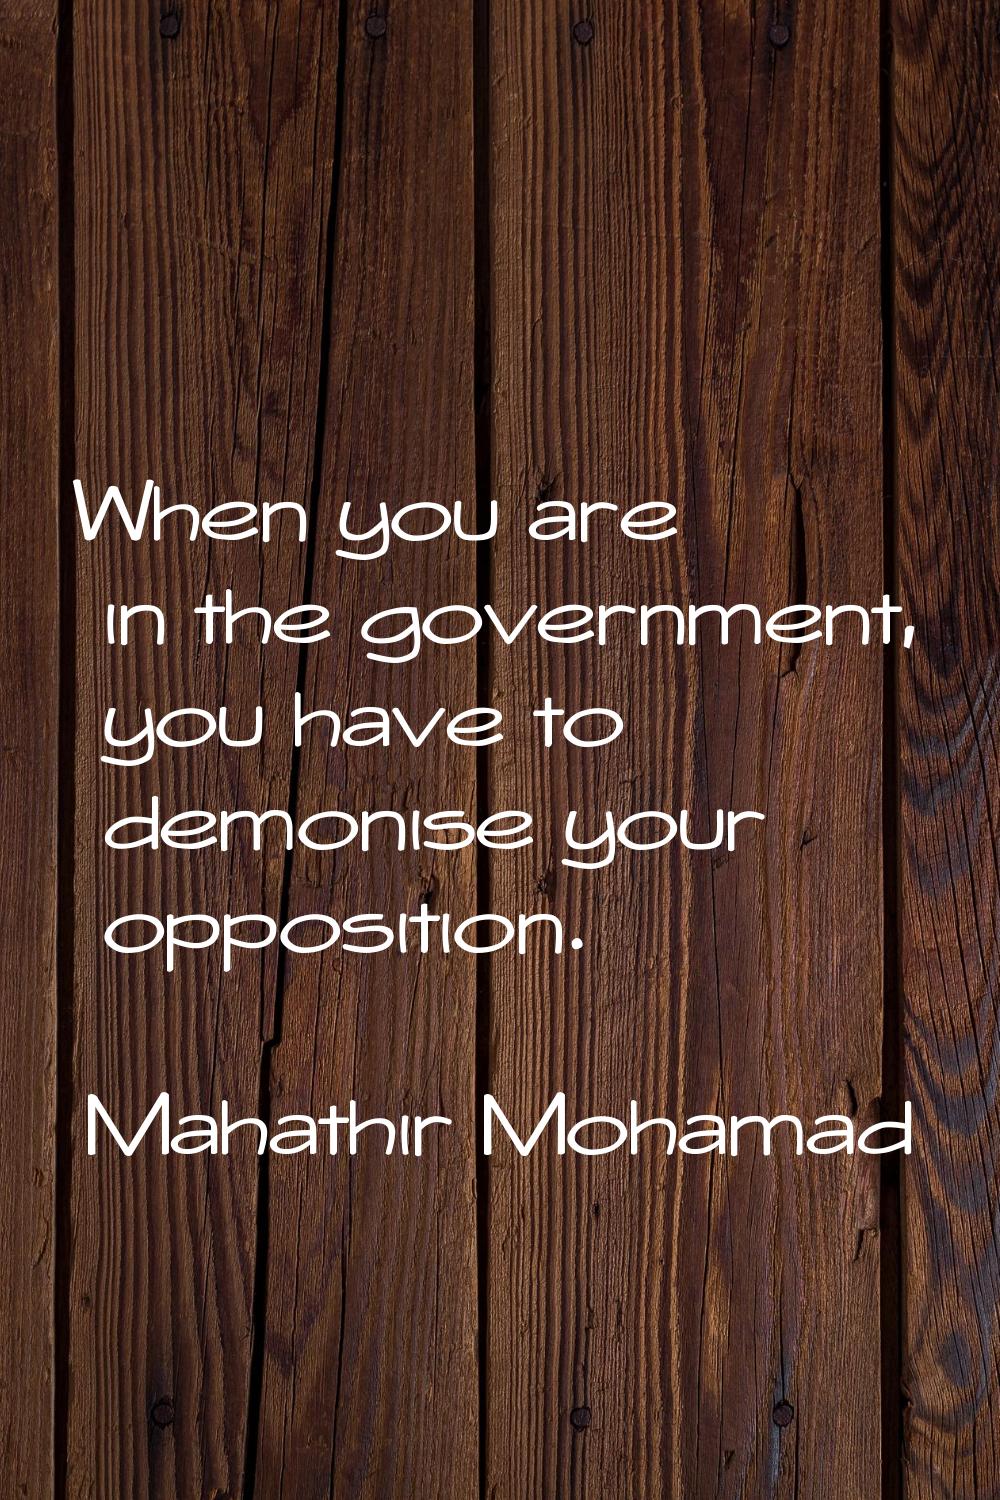 When you are in the government, you have to demonise your opposition.